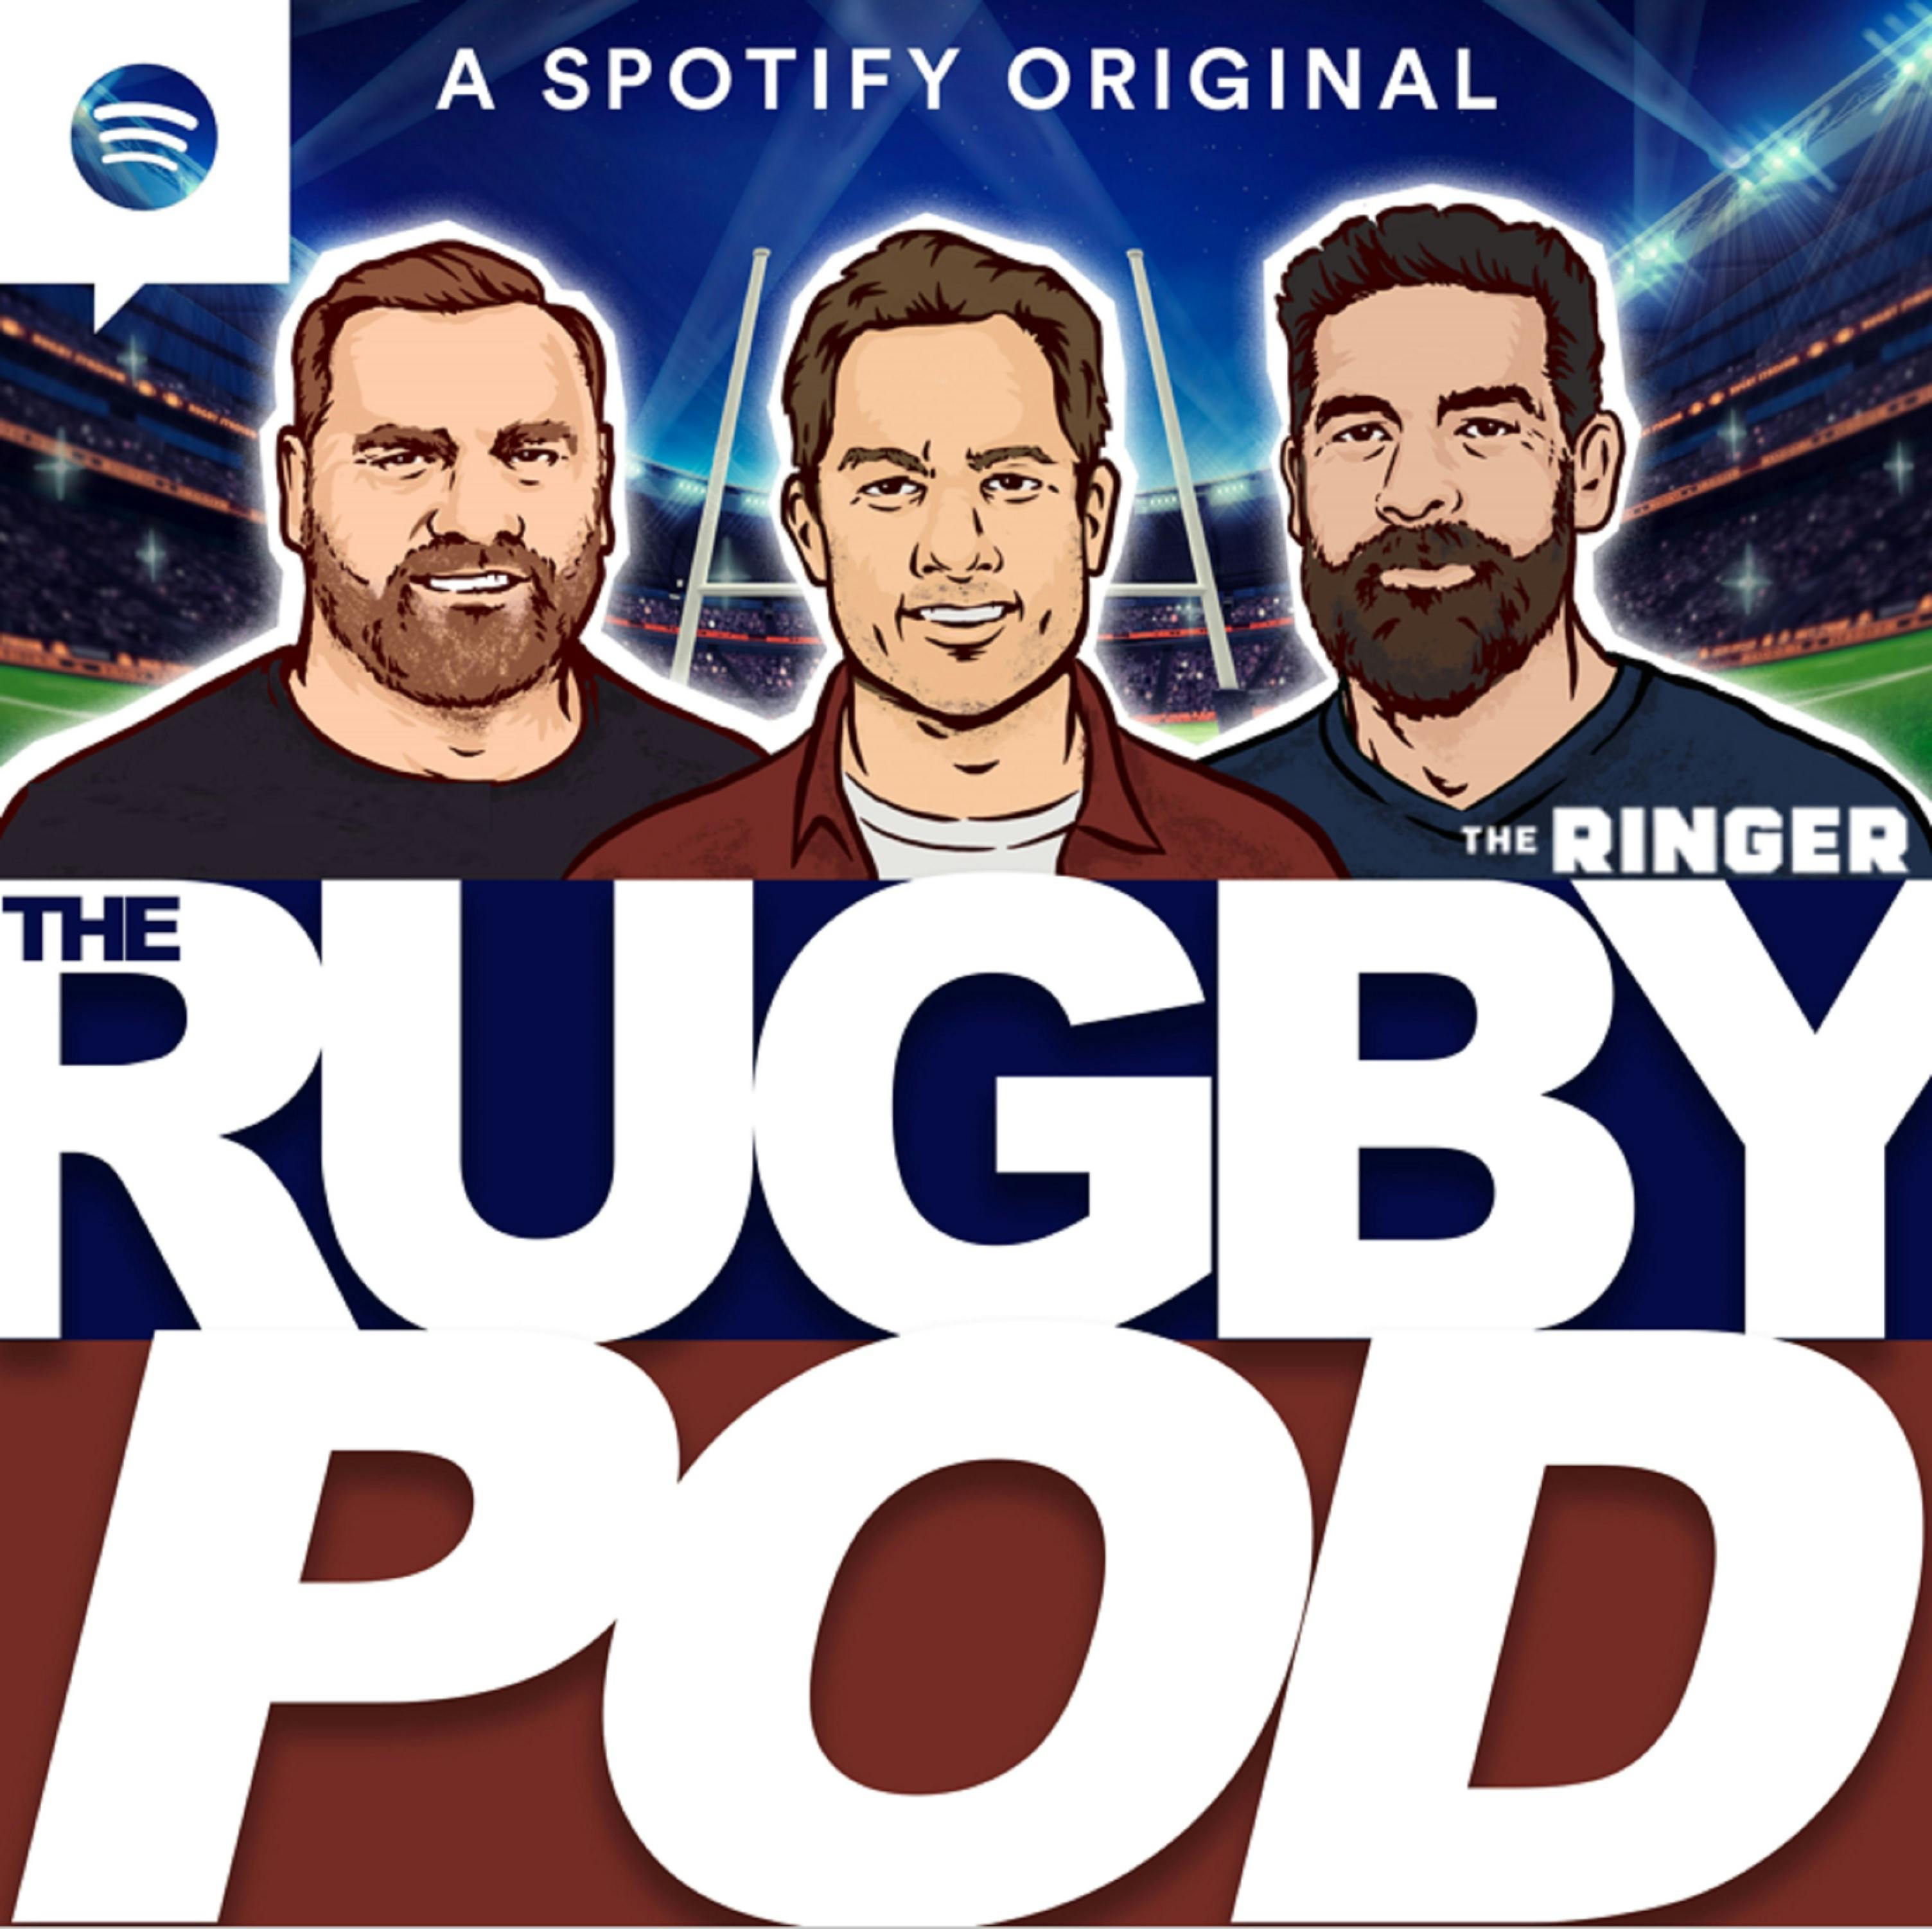 Episode 18 - All Blacks of the North with Gary Graham, Borthwick Borrows Evans and Owen Farrell in Hot Water